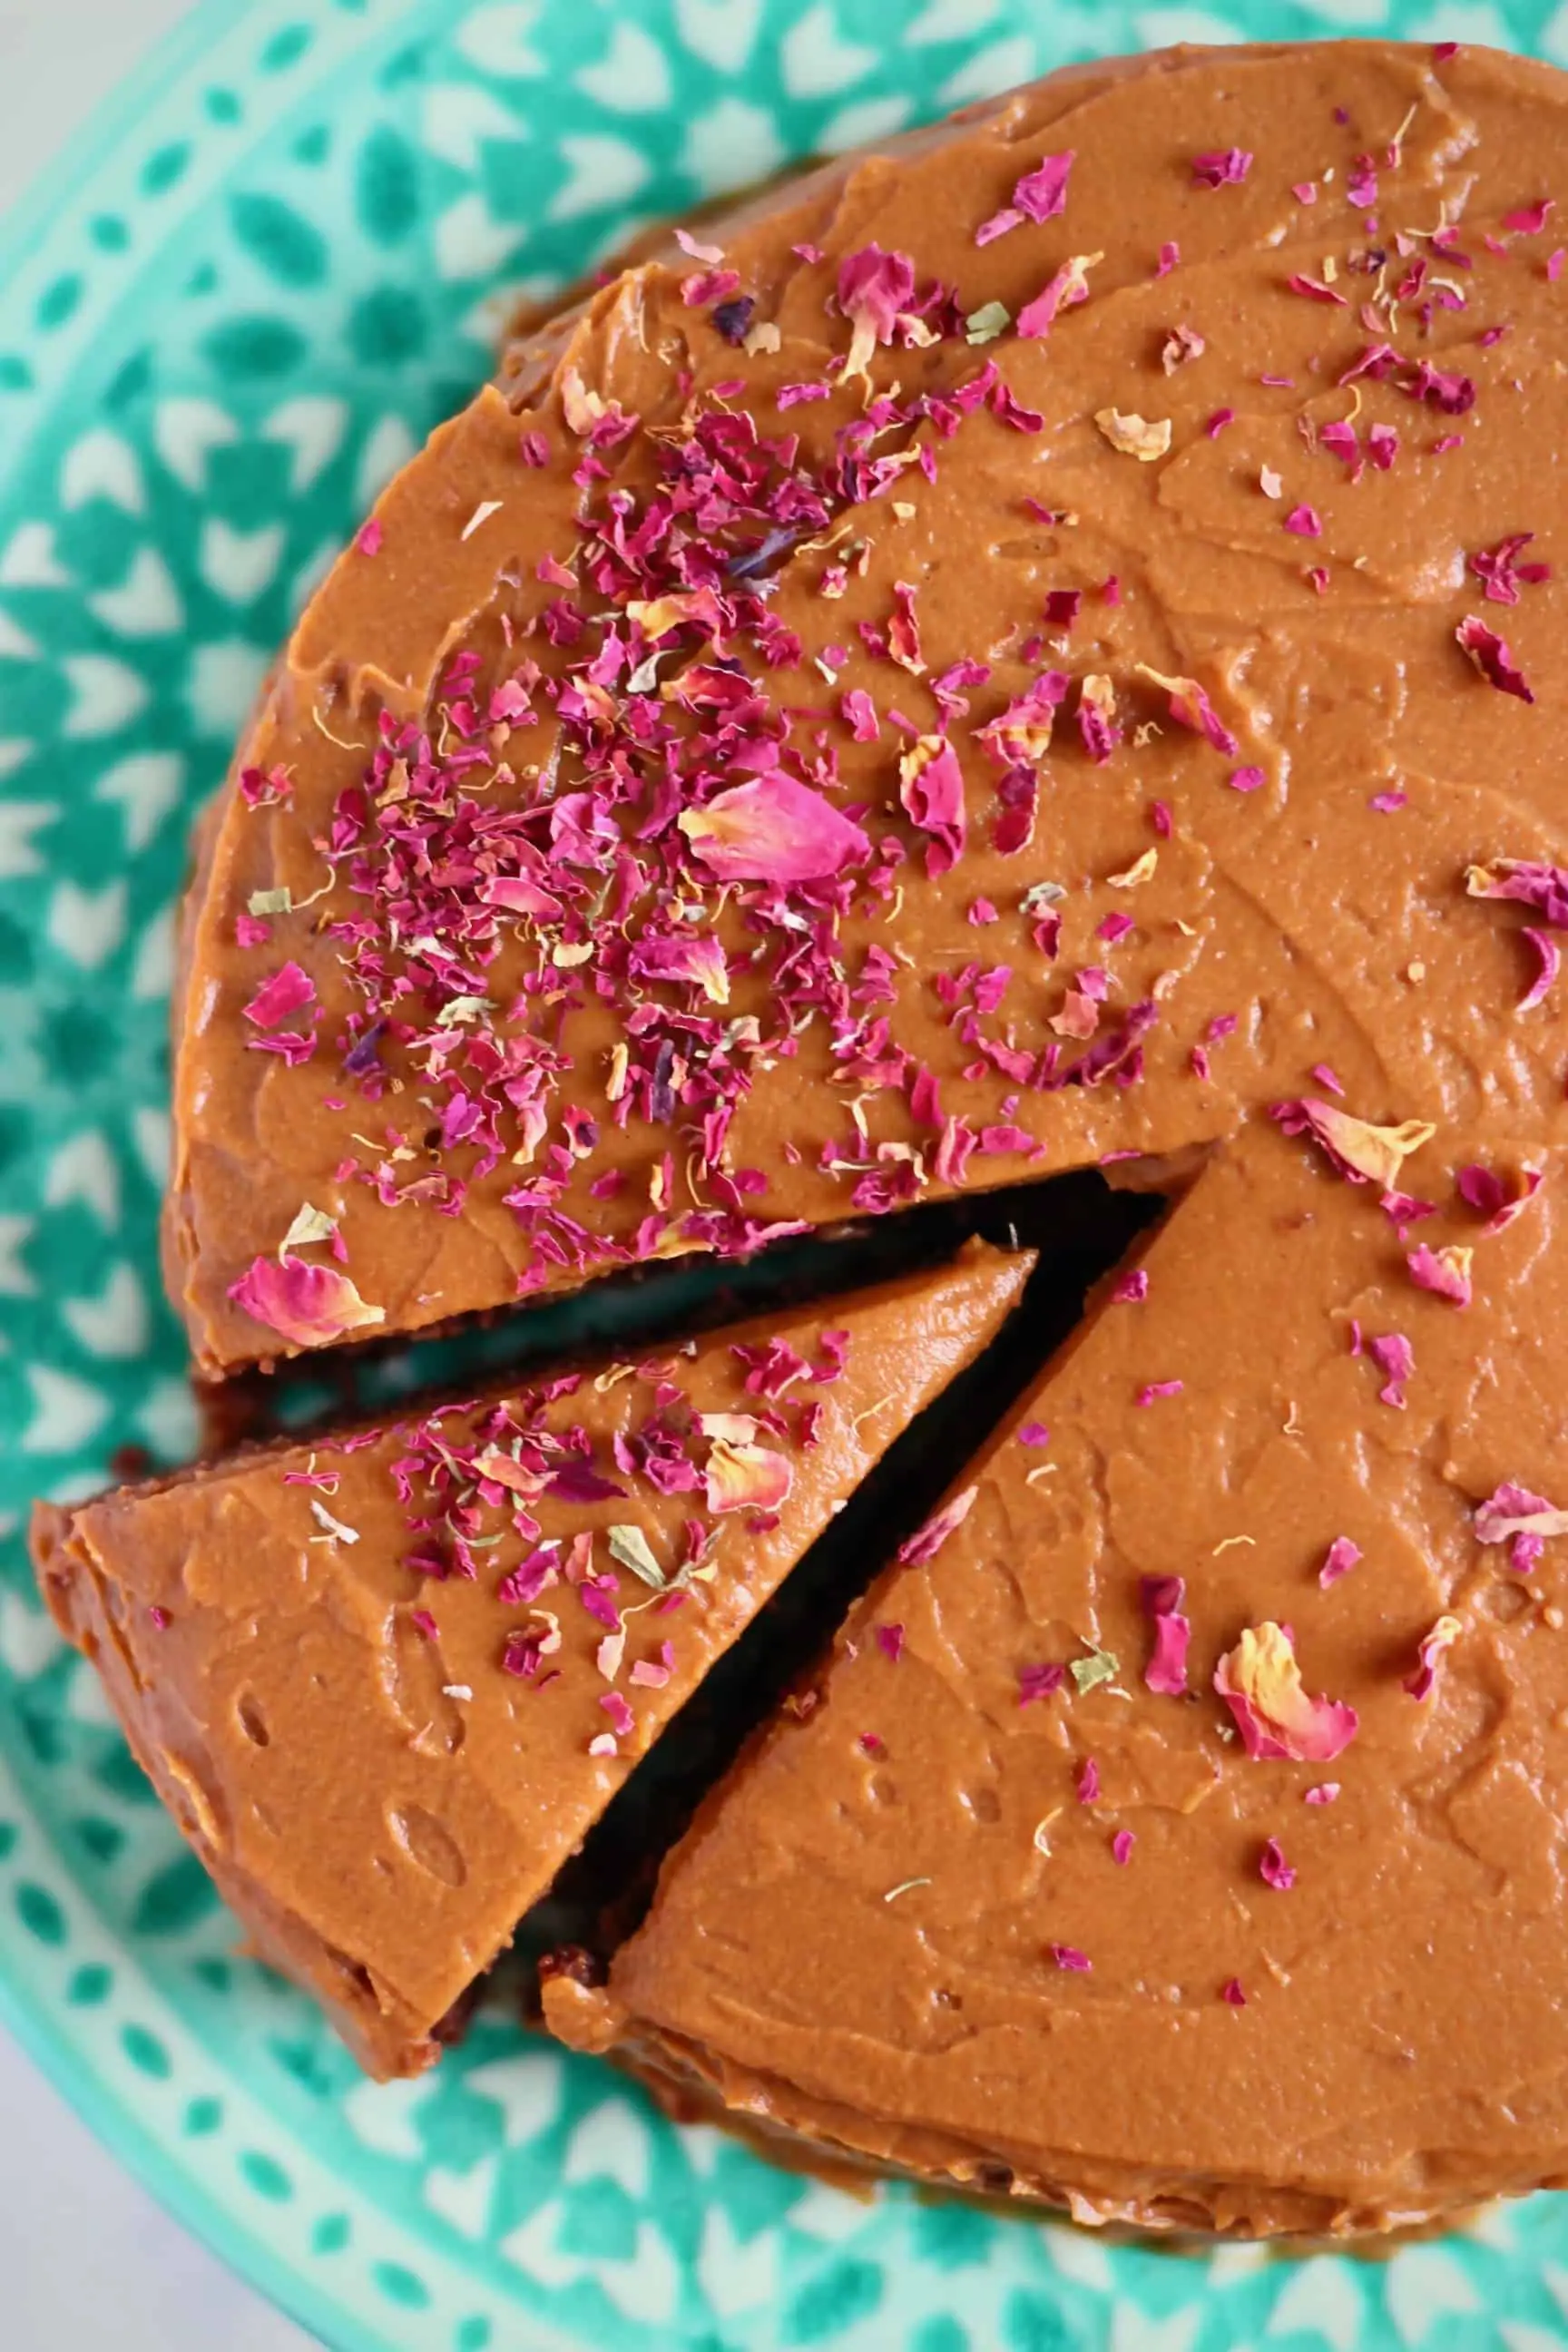 A chocolate cake with a slice taken out of it sprinkled with rose petals on a green cake stand